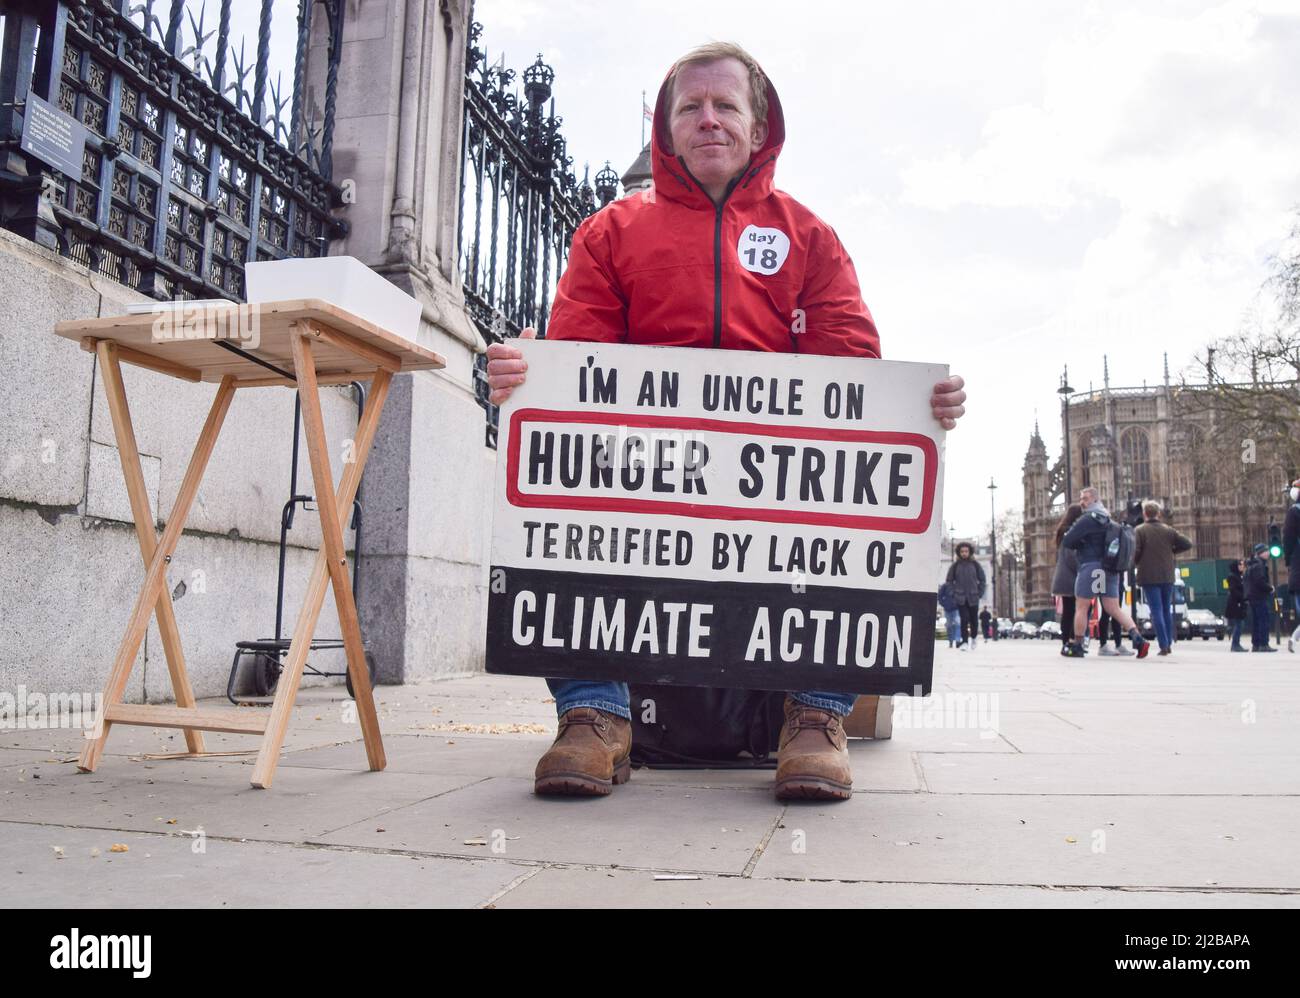 London, UK. 31st March 2022. Angus Rose on Day 18 of his hunger strike outside the Parliament. According to the protester, the Prime Minister received a secret briefing in 2020 from the Chief Scientific Advisor on the risks of, and solutions to, the climate crisis, and the self-described 'uncle on hunger strike' is asking Boris Johnson to make this briefing public and to act on climate change. Credit: Vuk Valcic/Alamy Live News Stock Photo